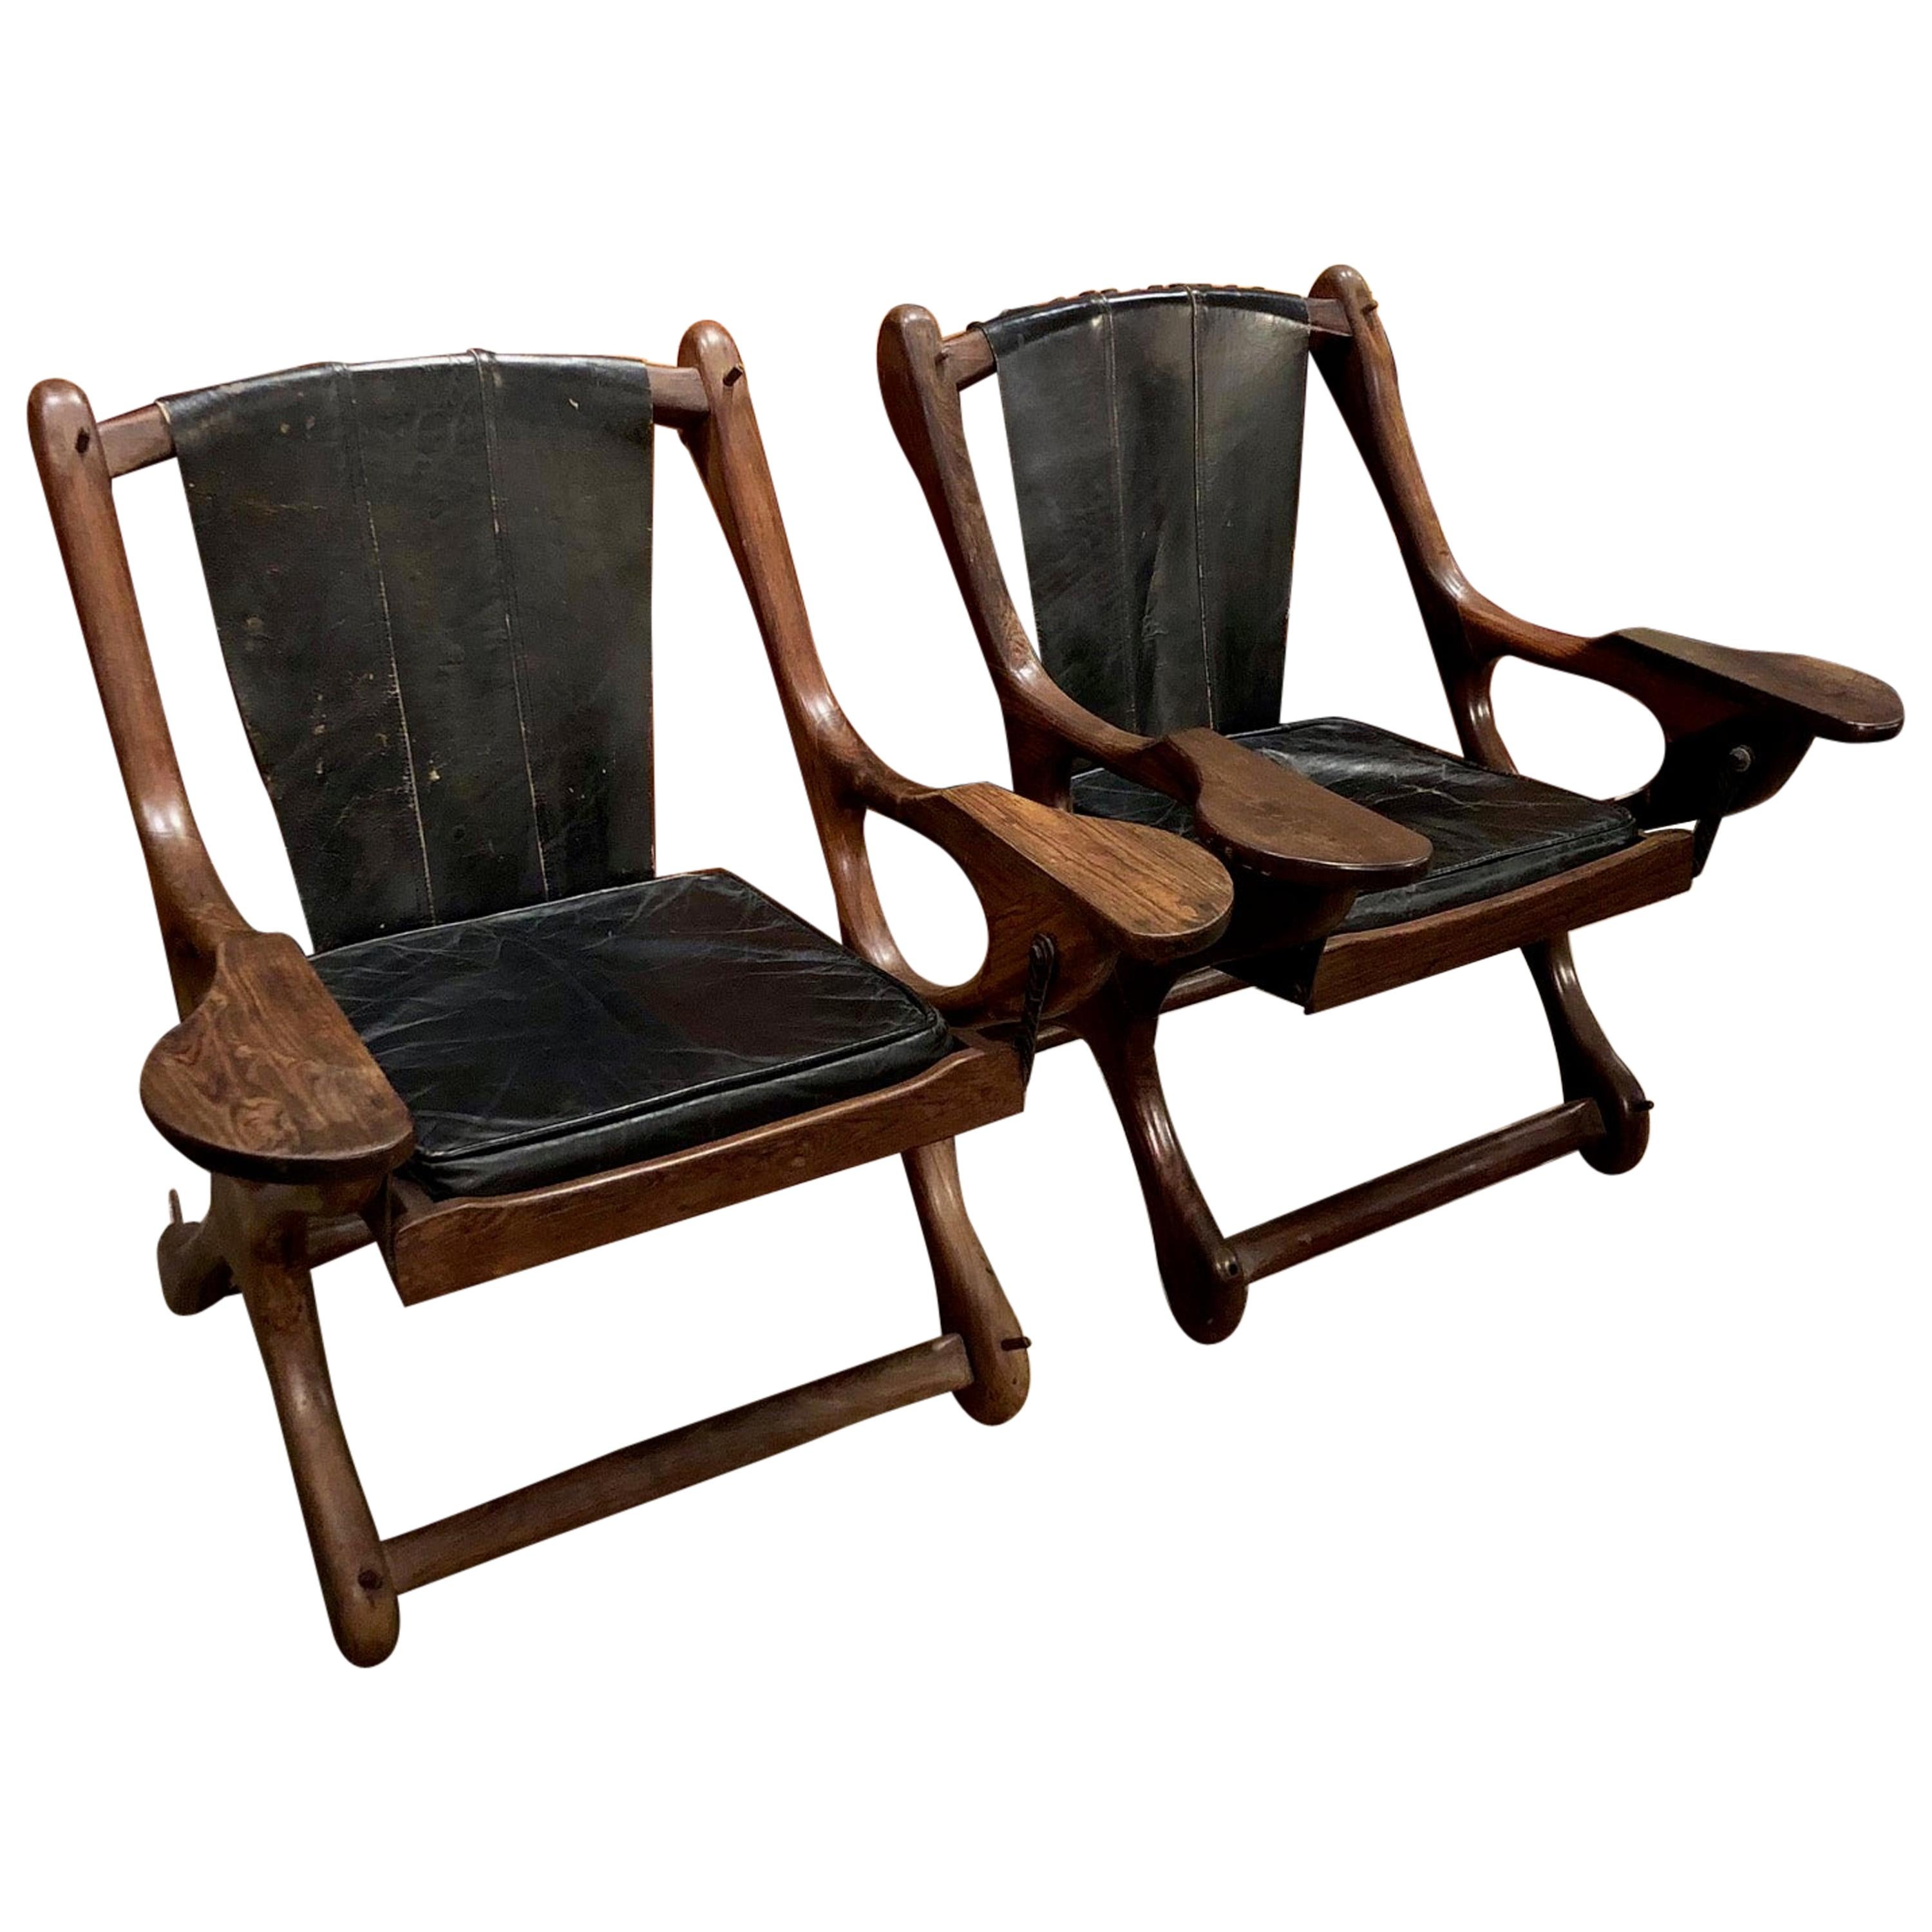 Vintage 1960s Leather and Cocobolo Sling 'Swinger' Chairs by Don Shoemaker